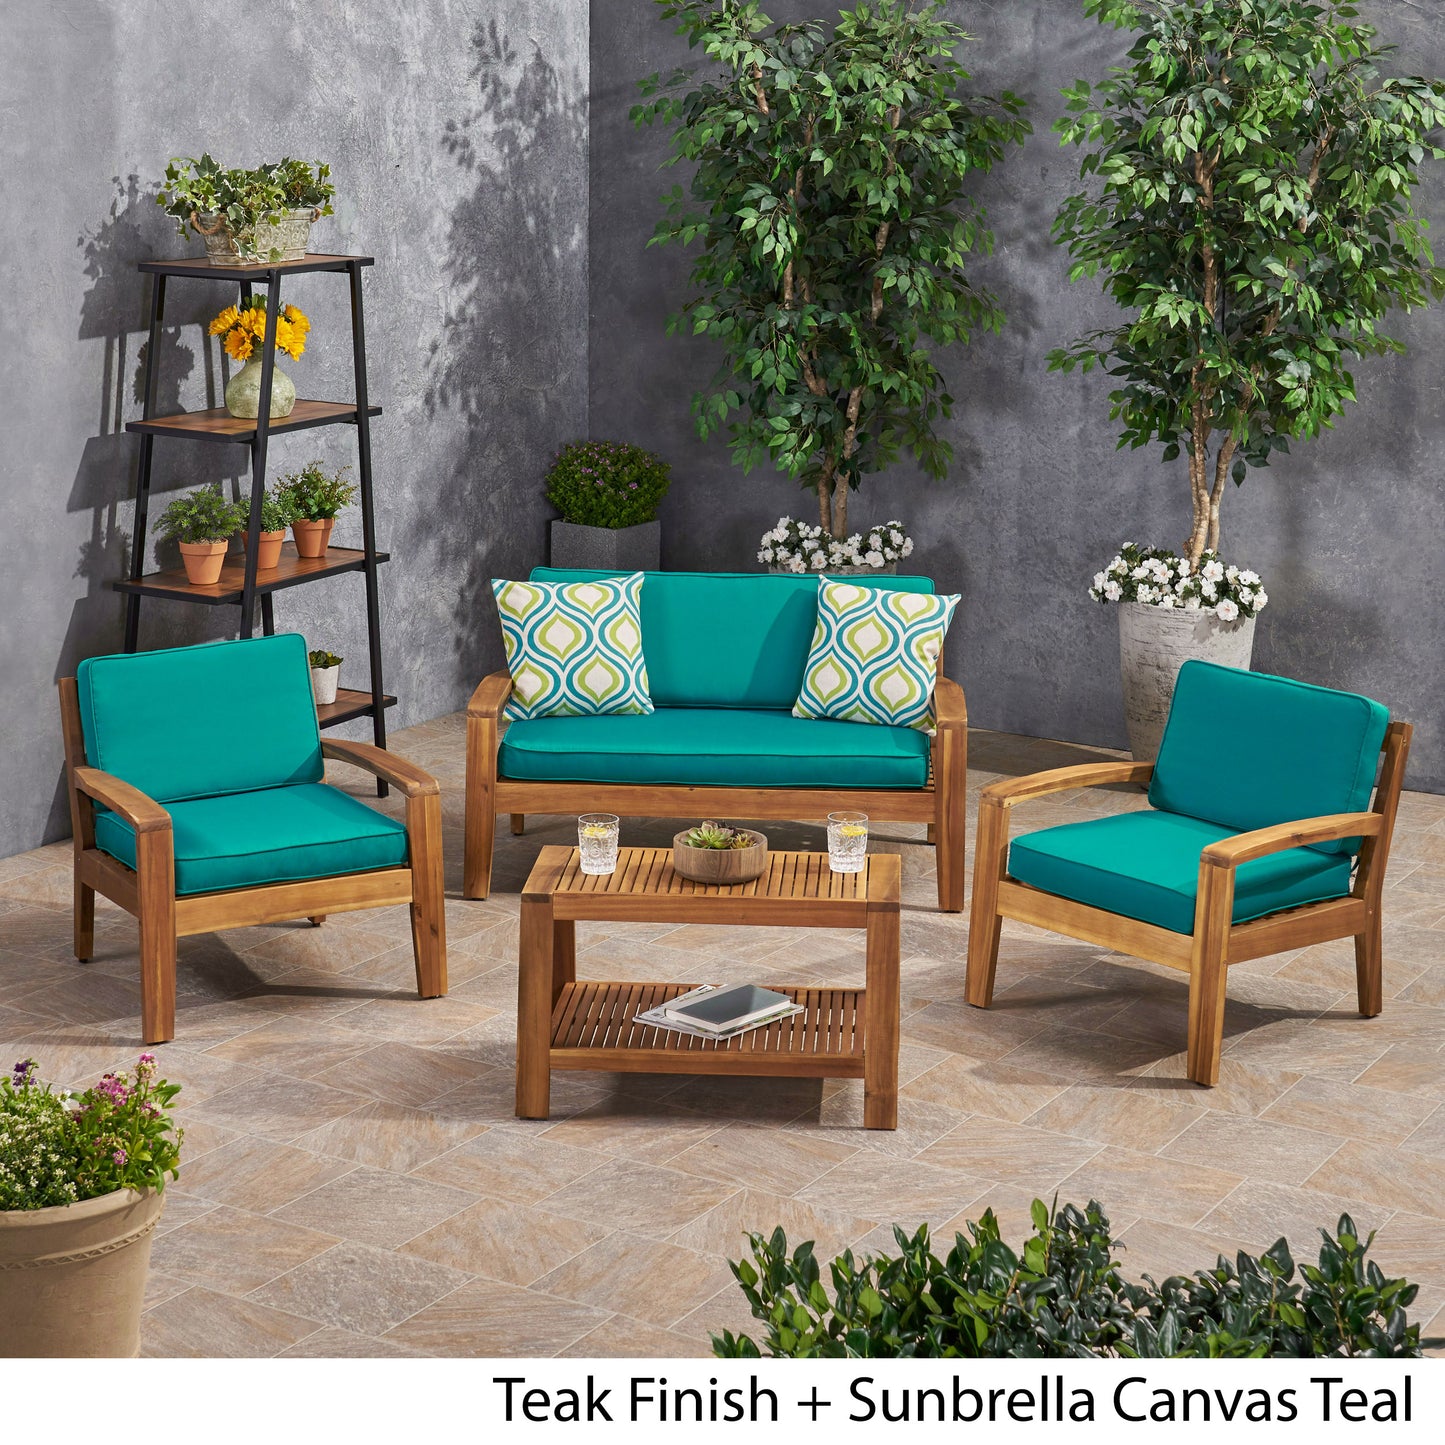 Parma Patio Acacia Wood 4-Seater Conversation Set with Coffee Table and Sunbrella Cushions